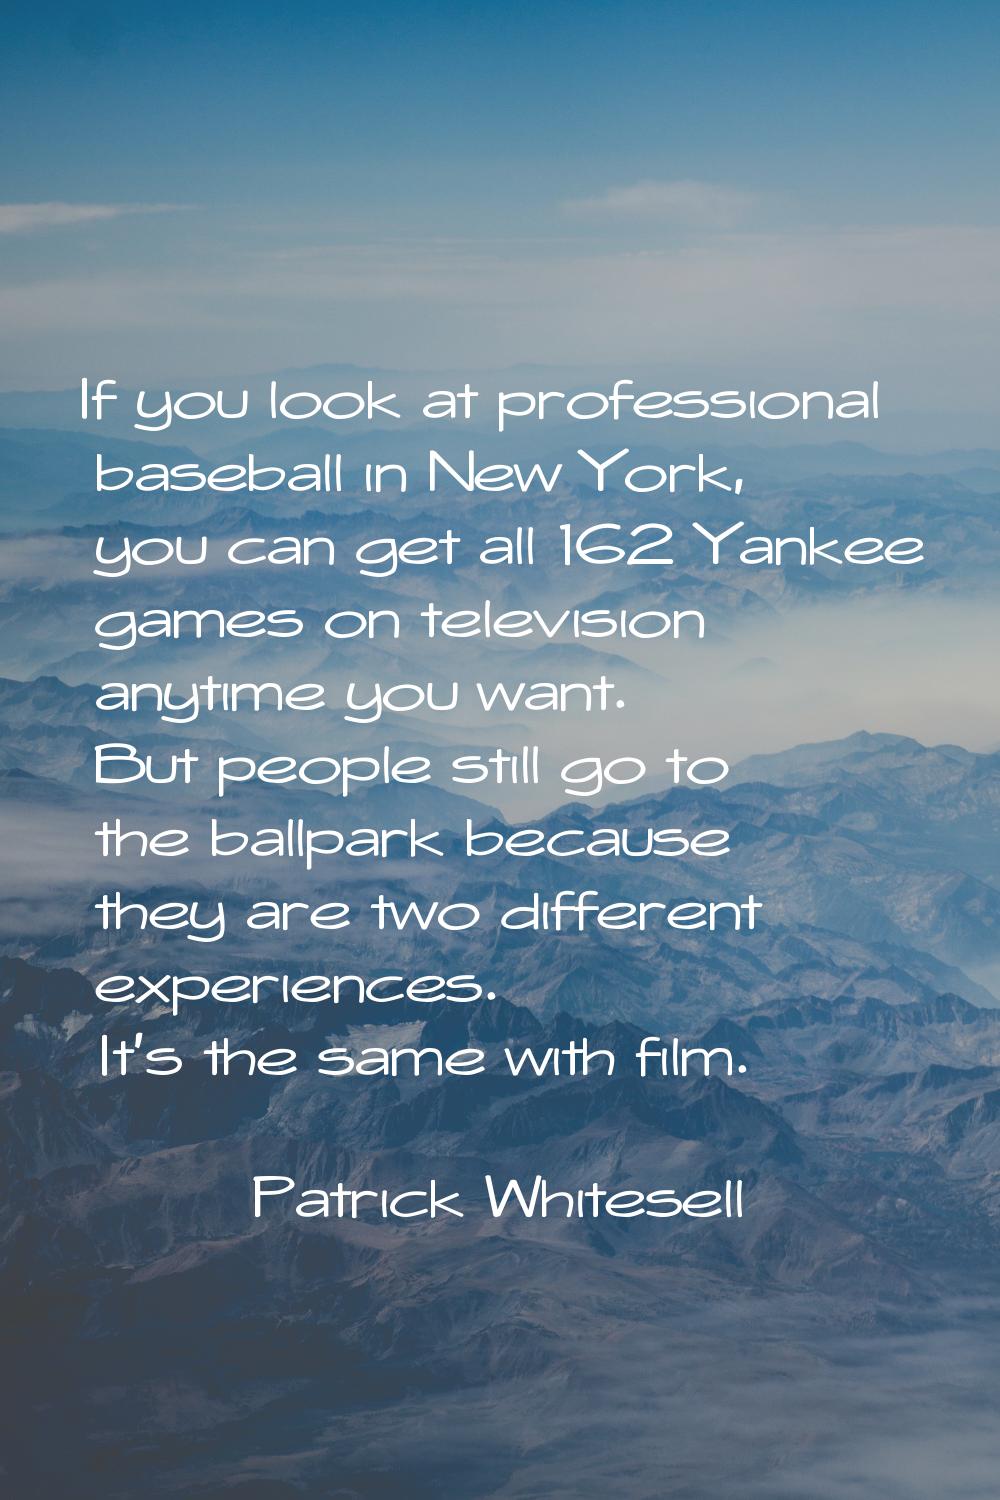 If you look at professional baseball in New York, you can get all 162 Yankee games on television an